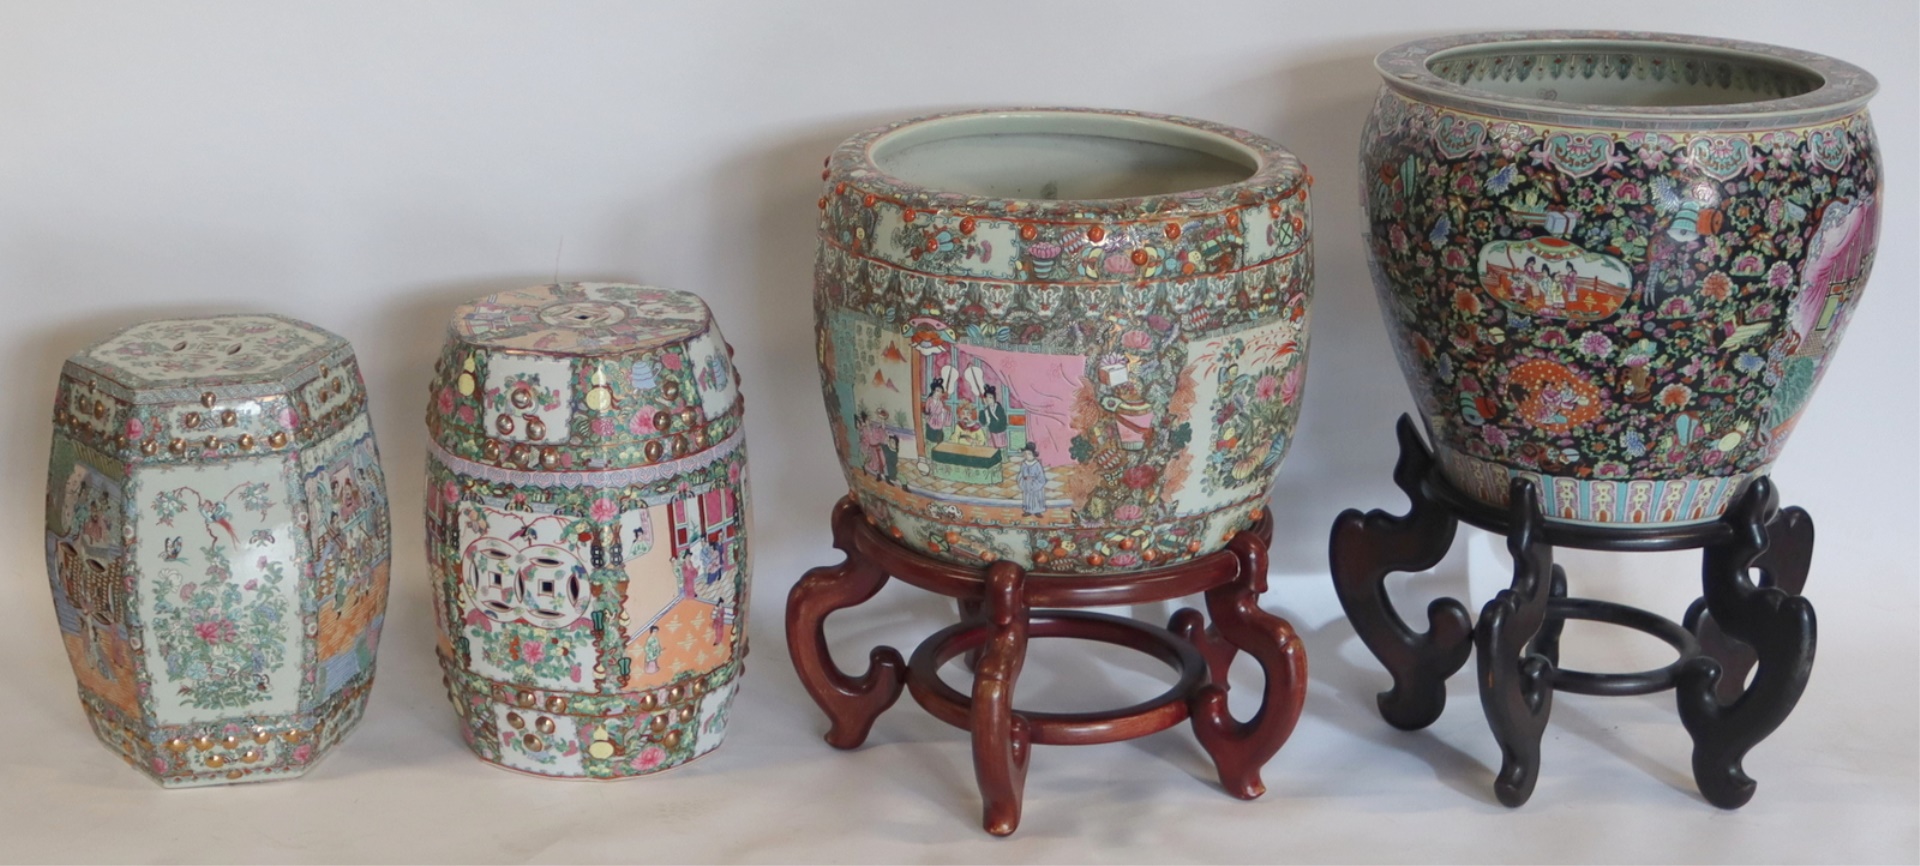 GROUPING OF ASIAN ENAMEL DECORATED 3baf56